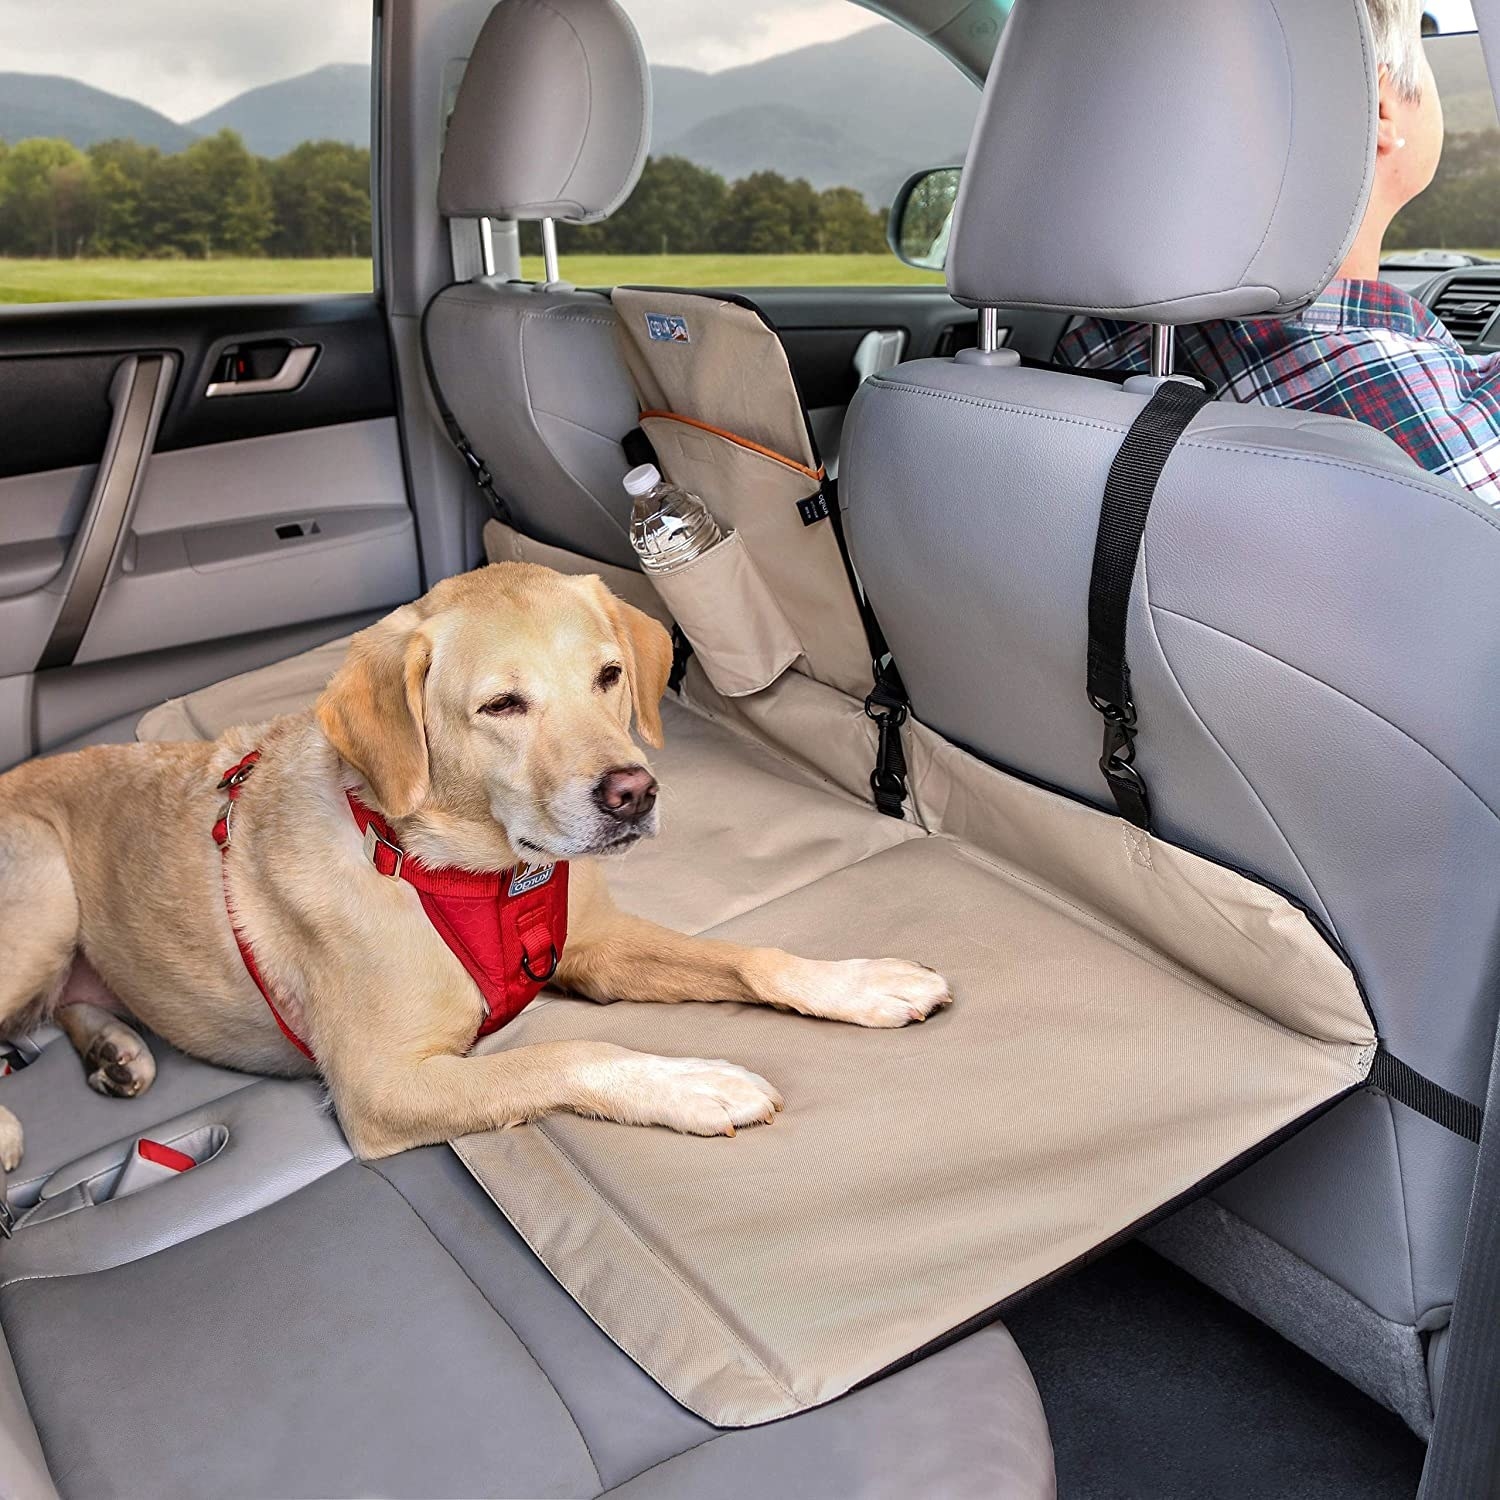 A dog laying out in the backseat with the extender attached, allowing it to sit comfortably in a natural position